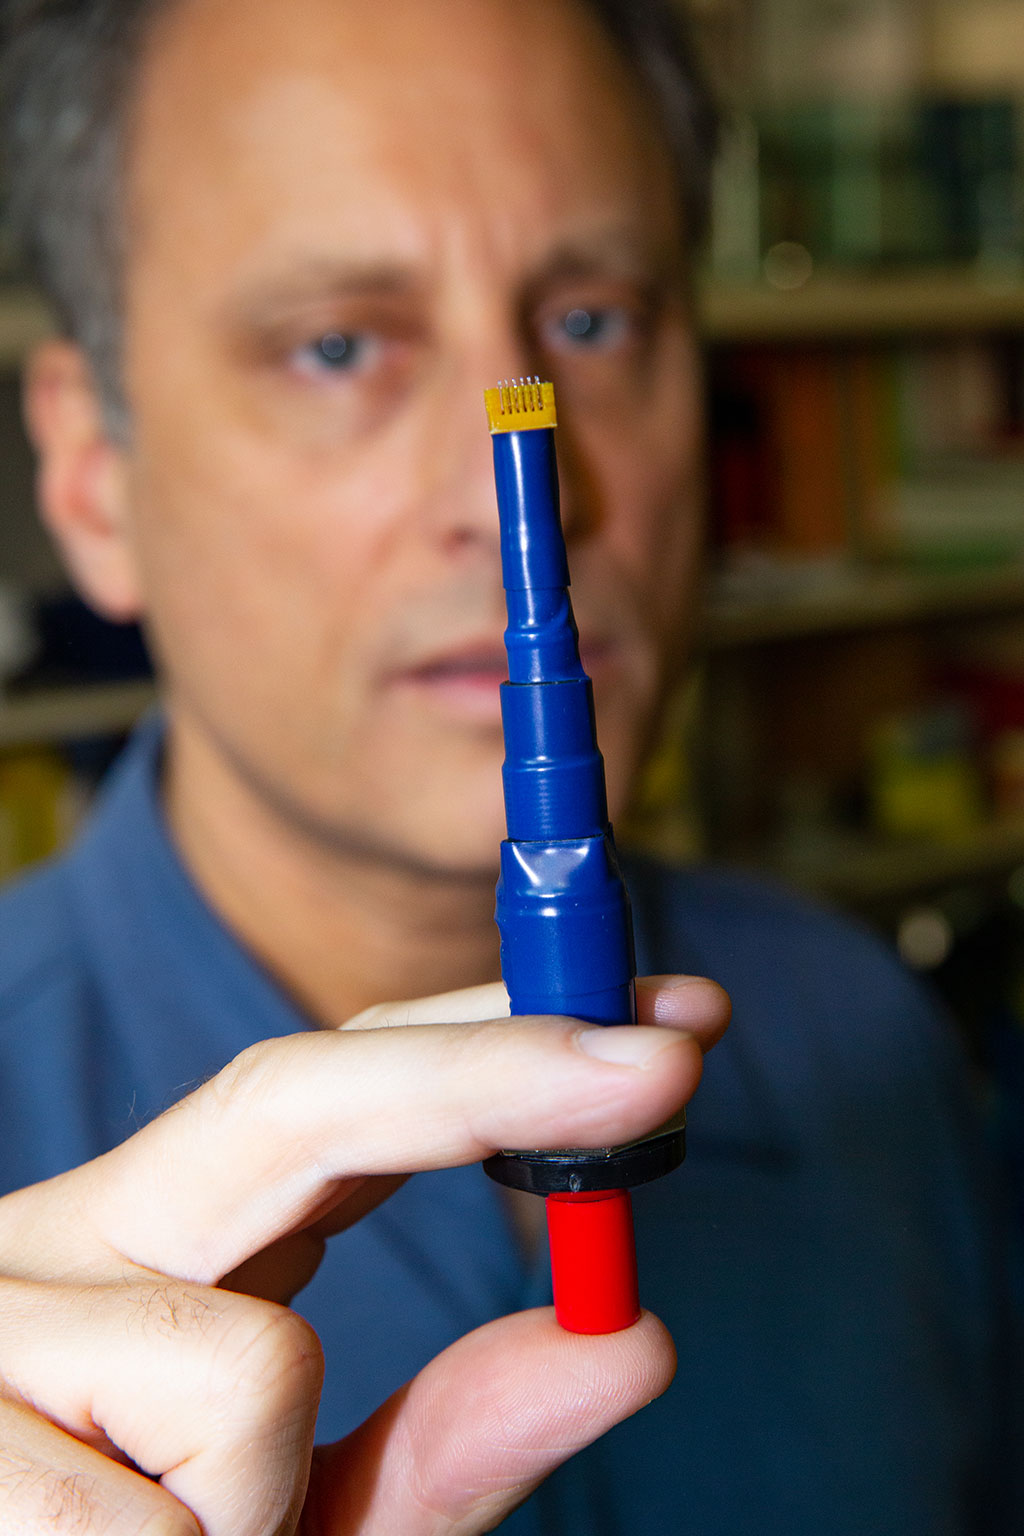 Image: The ultra-low-cost ePatch vaccination device (Photo courtesy of Candler Hobbs, Georgia Tech)